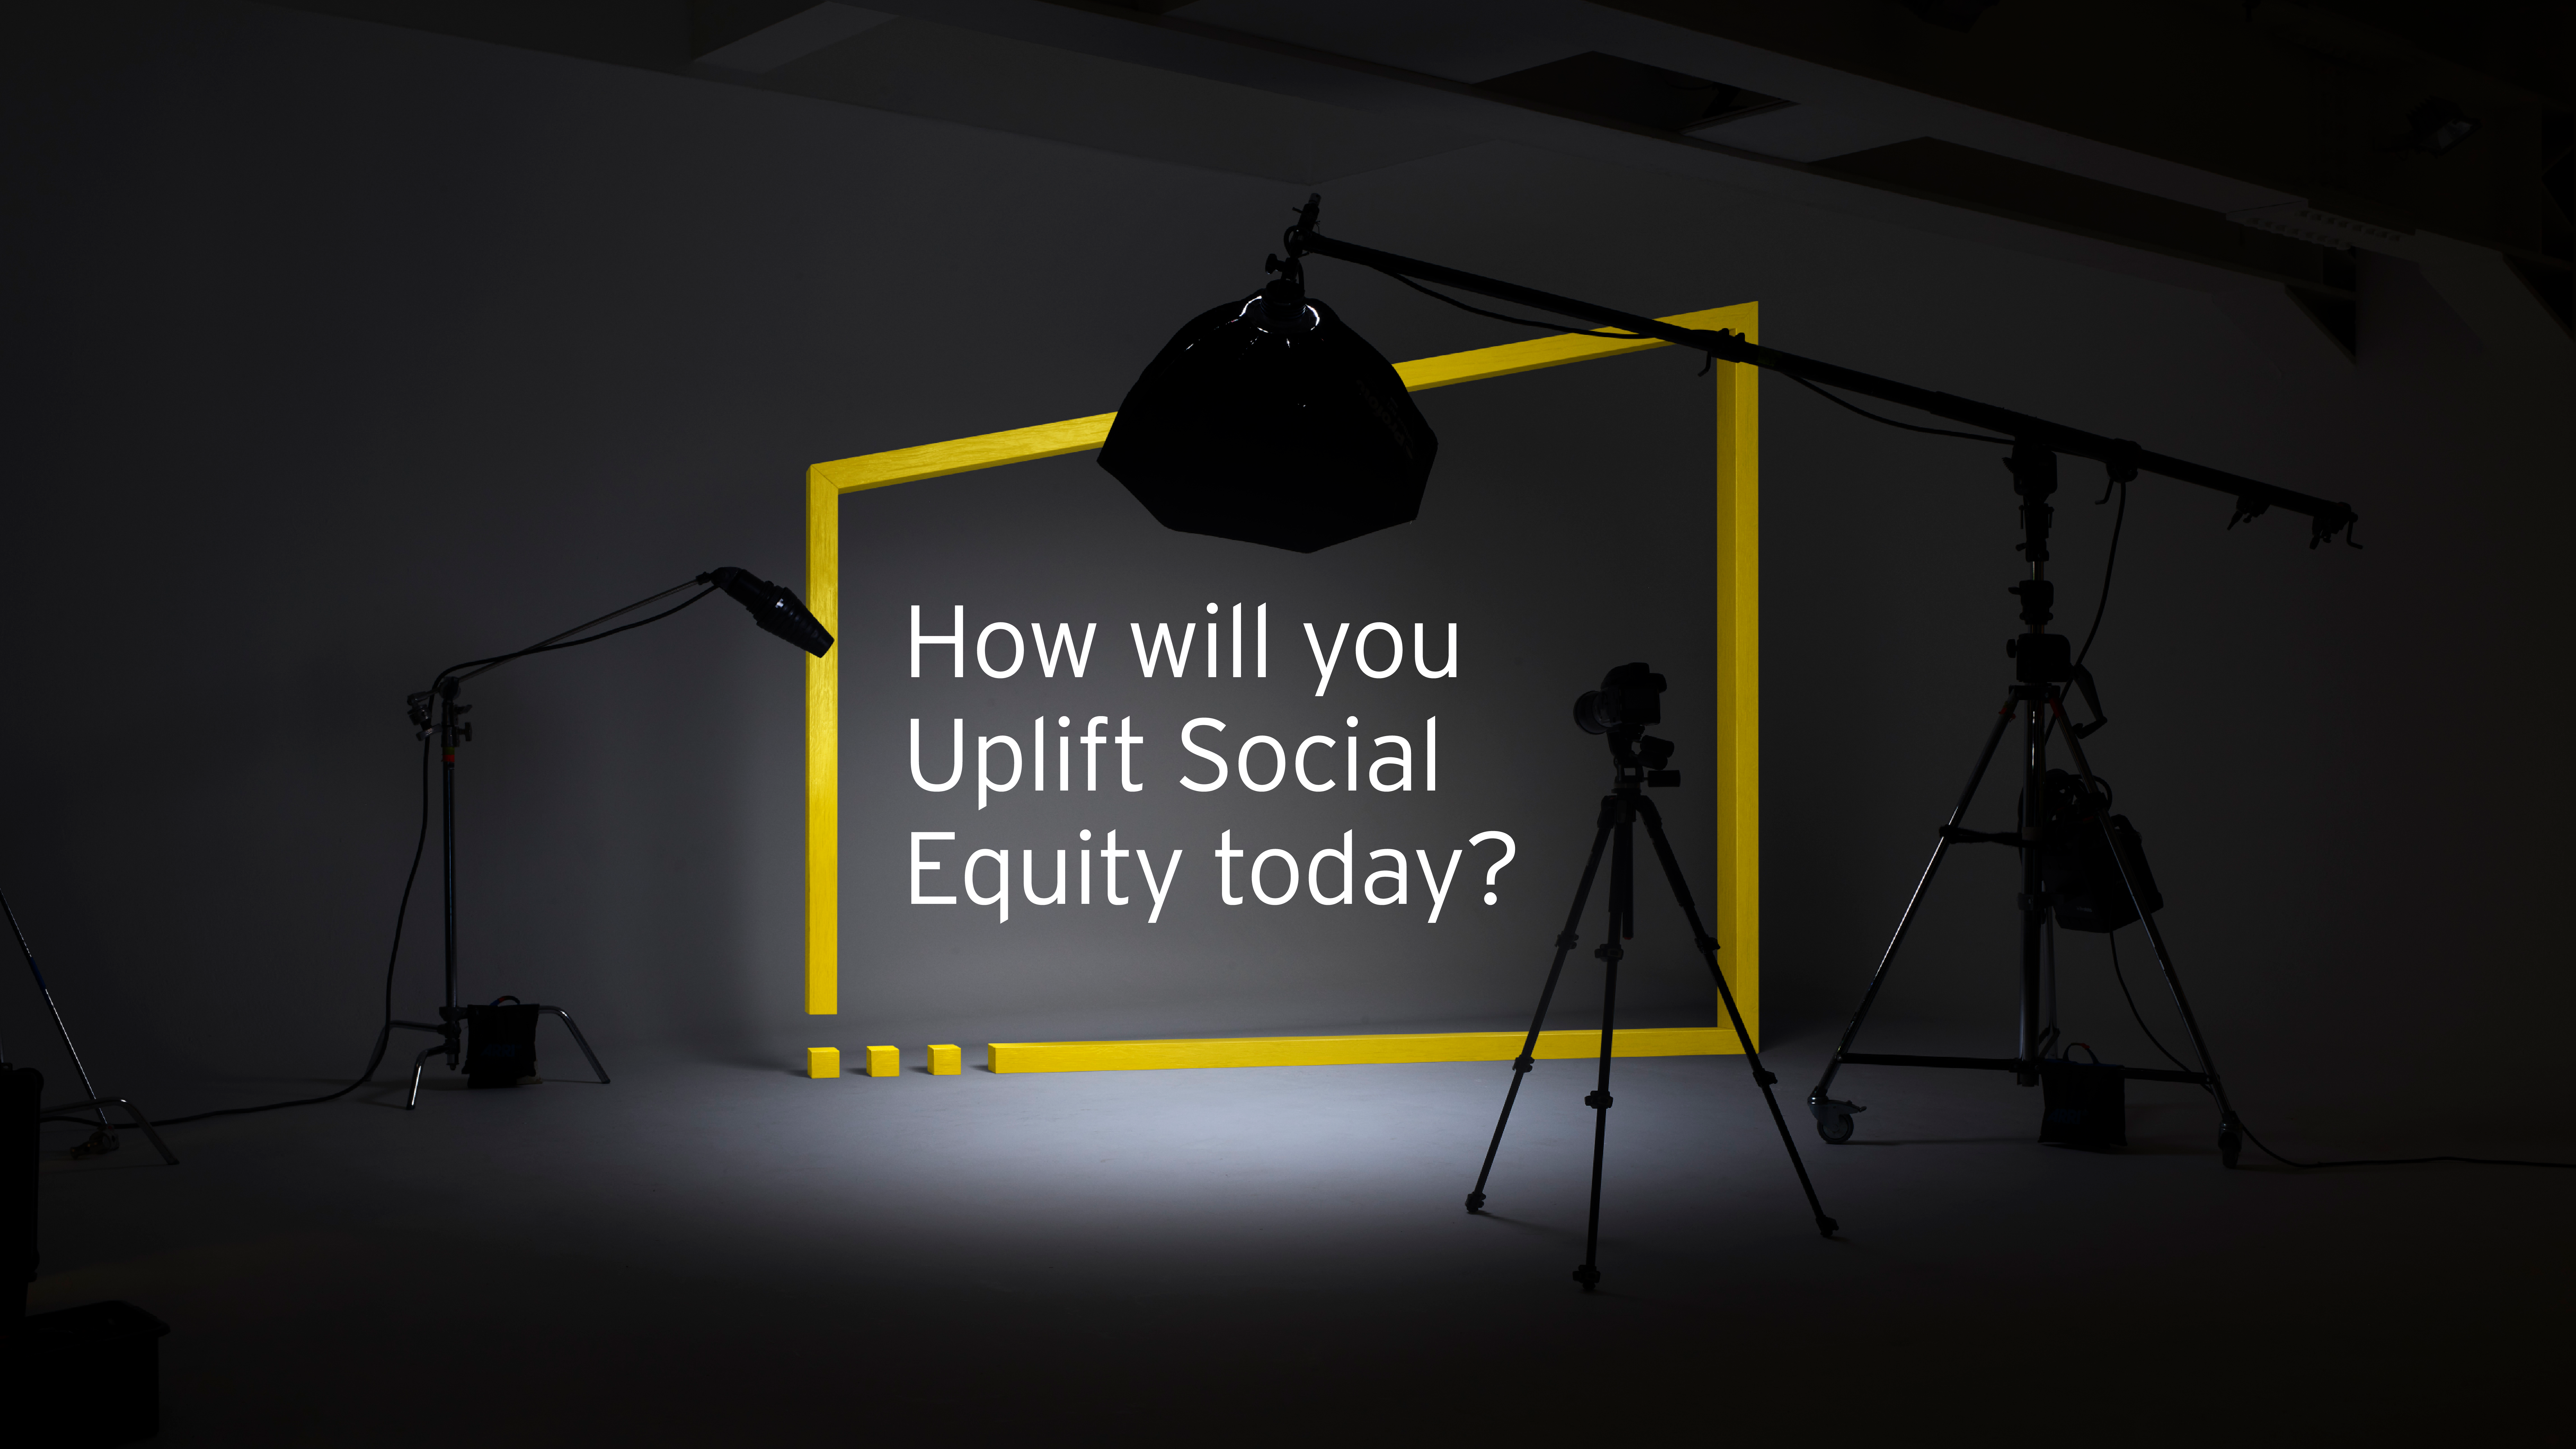 A yellow box sits on a photoset with lights pointing at it, text inside reads 'How will you Uplift Social Equity today?'